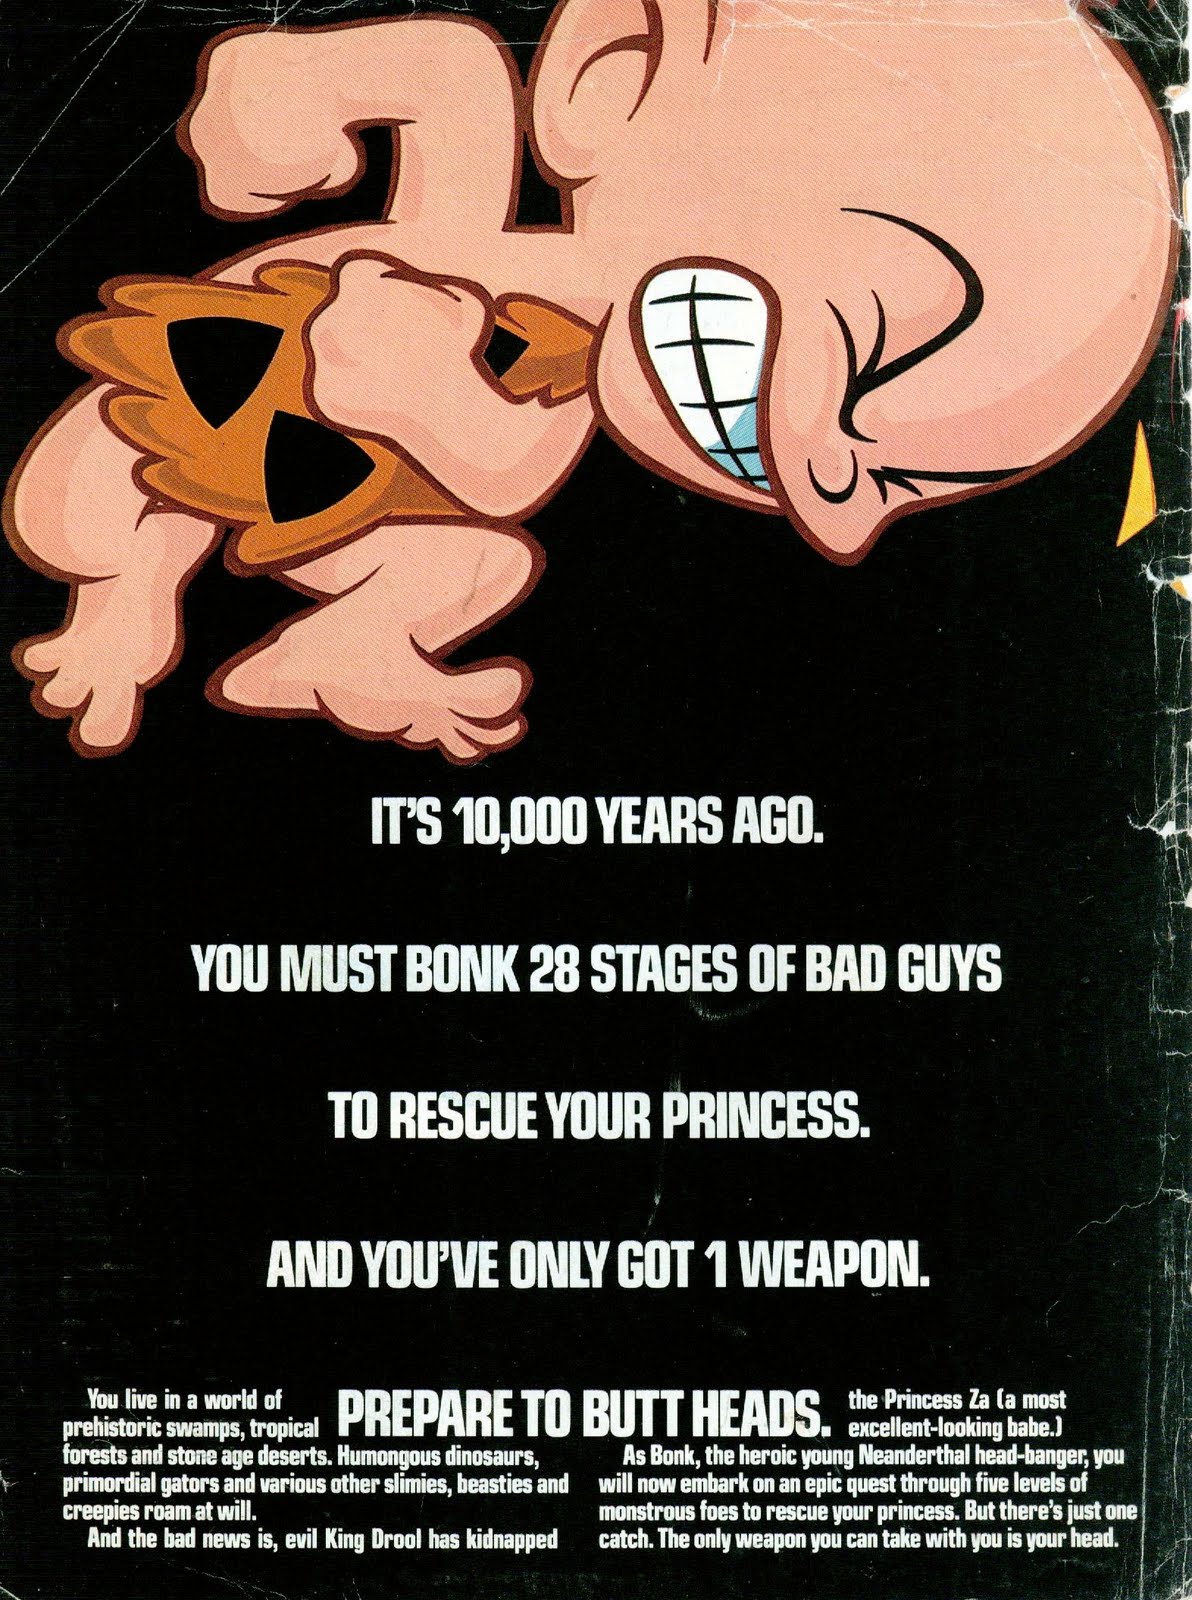 vintage gaming ads - bonk's adventure ad - It'S 10,000 Years Ago. You Must Bonk 28 Stages Of Bad Guys To Rescue Your Princess. And You'Ve Only Got 1 Weapon. prehistoric swamps, tropical Prepare To Butt Heads, the Princess za ta most You live in a world of